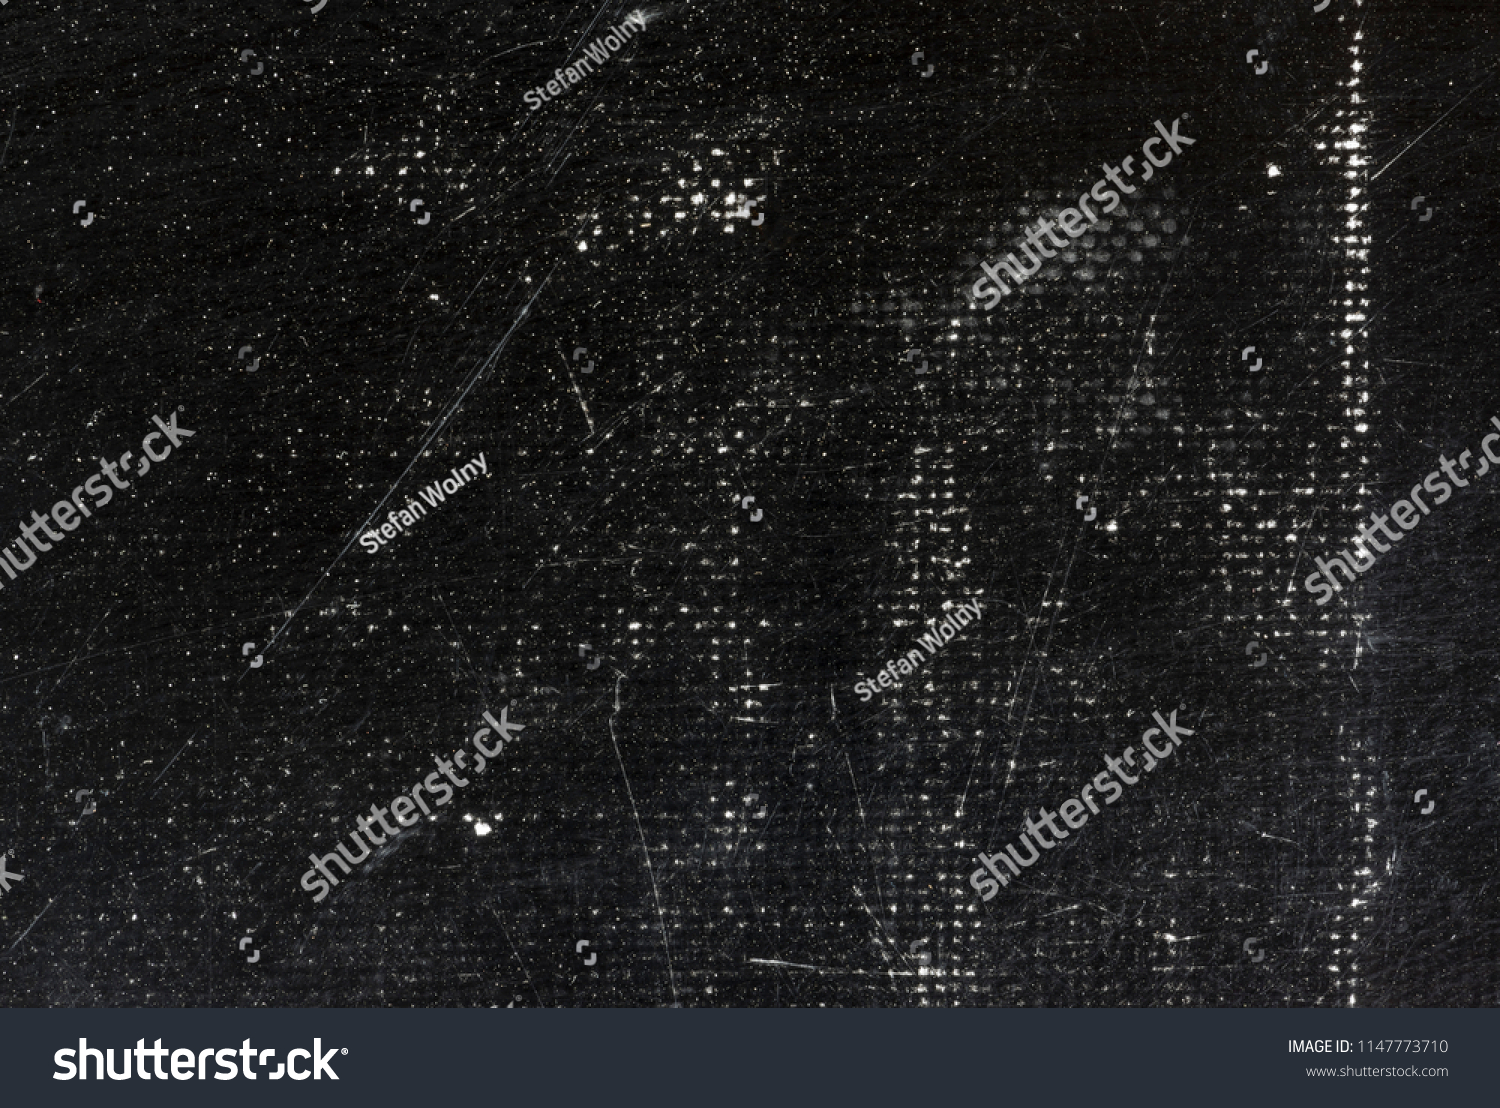 Old, scratched, grunge texture. White scratches on black background #1147773710